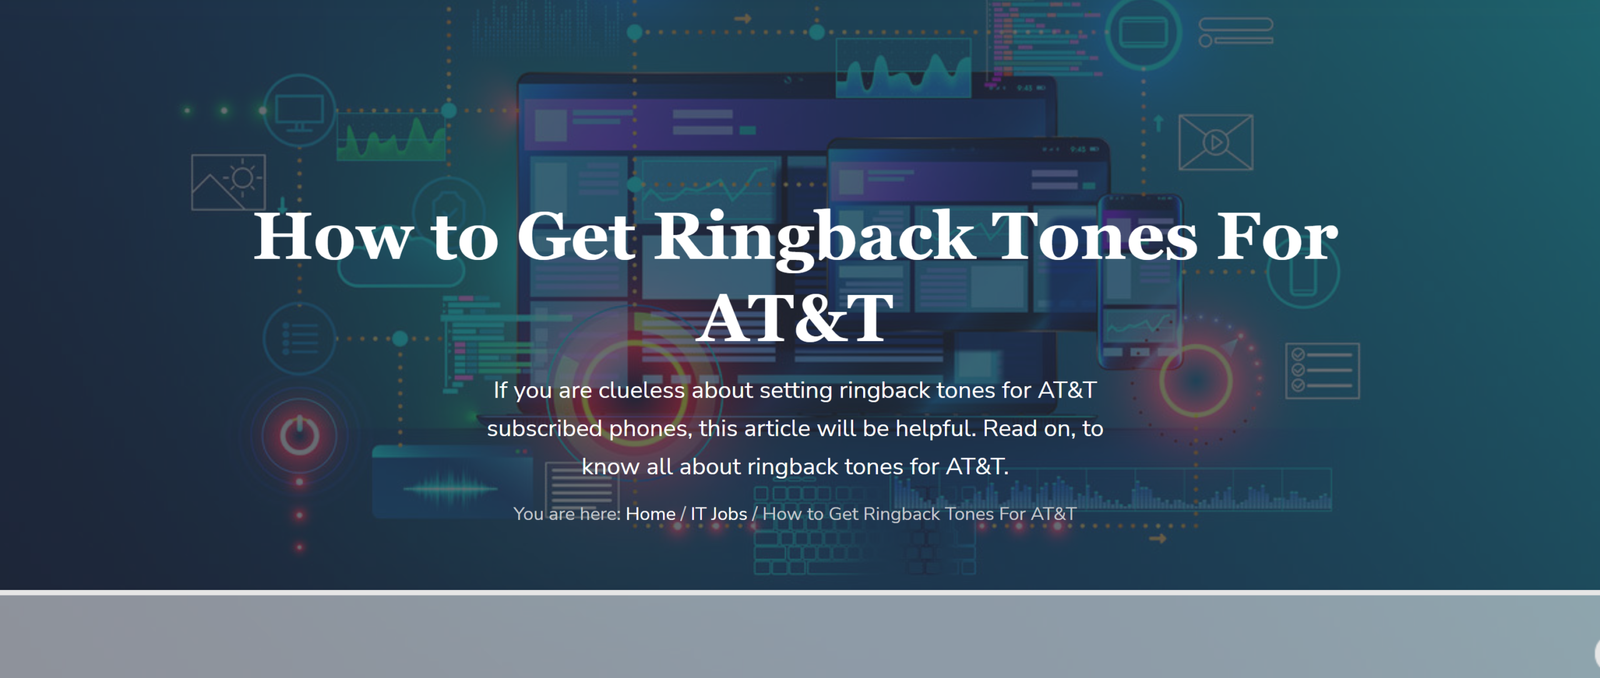 How to Get Ringback Tones With AT&T